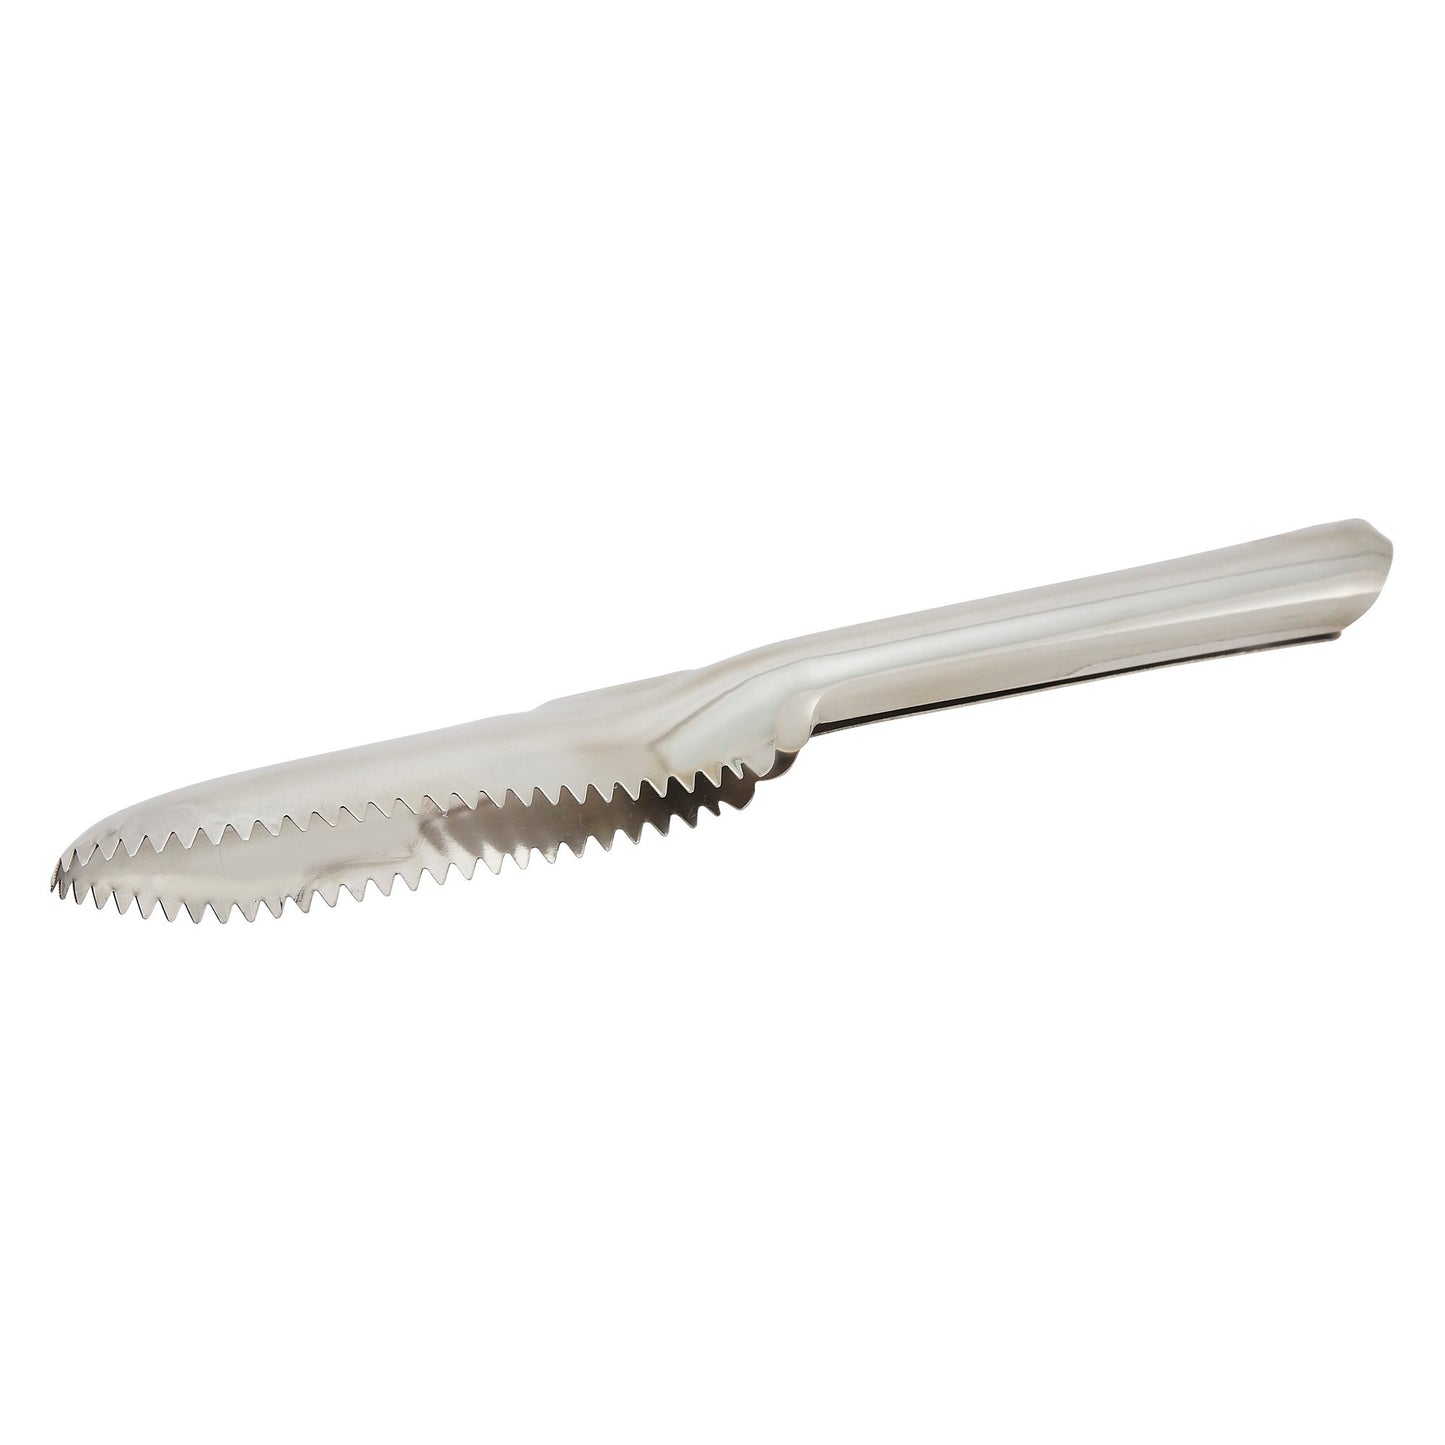 FSP-9 - 9-1/2" Fish Scaler, Stainless Steel